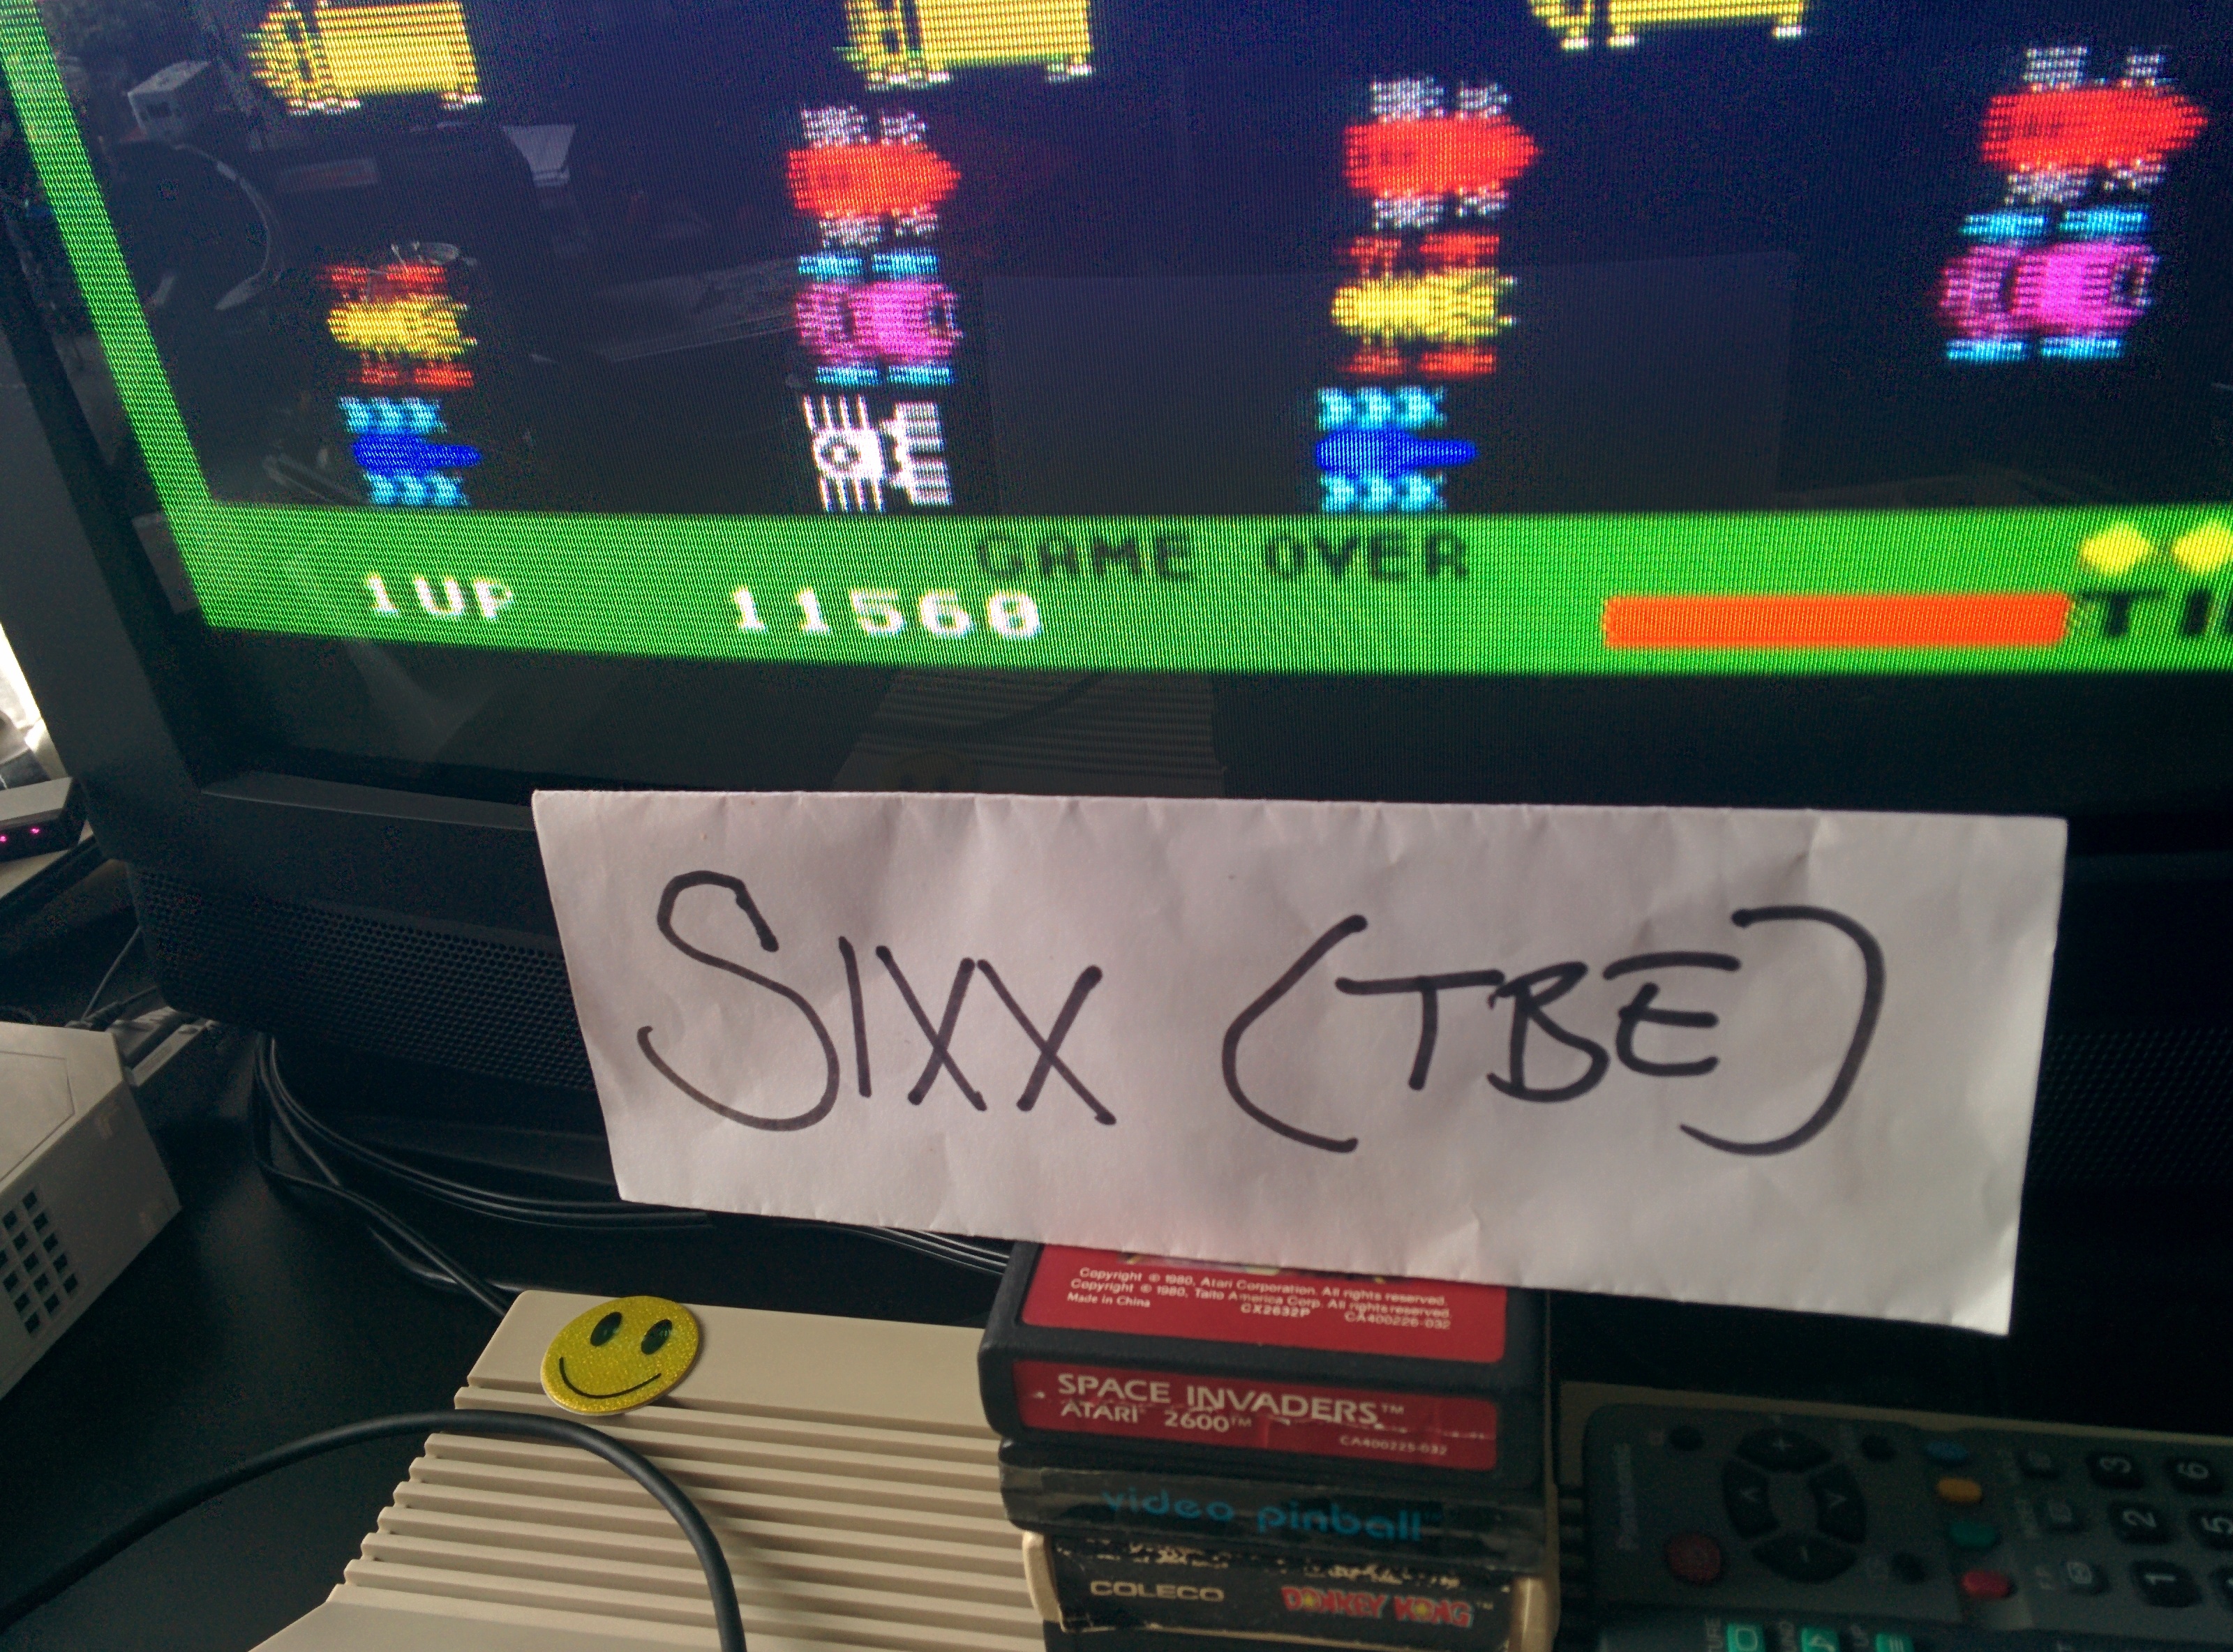 Sixx: Frogger (Colecovision Emulated) 11,560 points on 2014-07-26 09:24:48